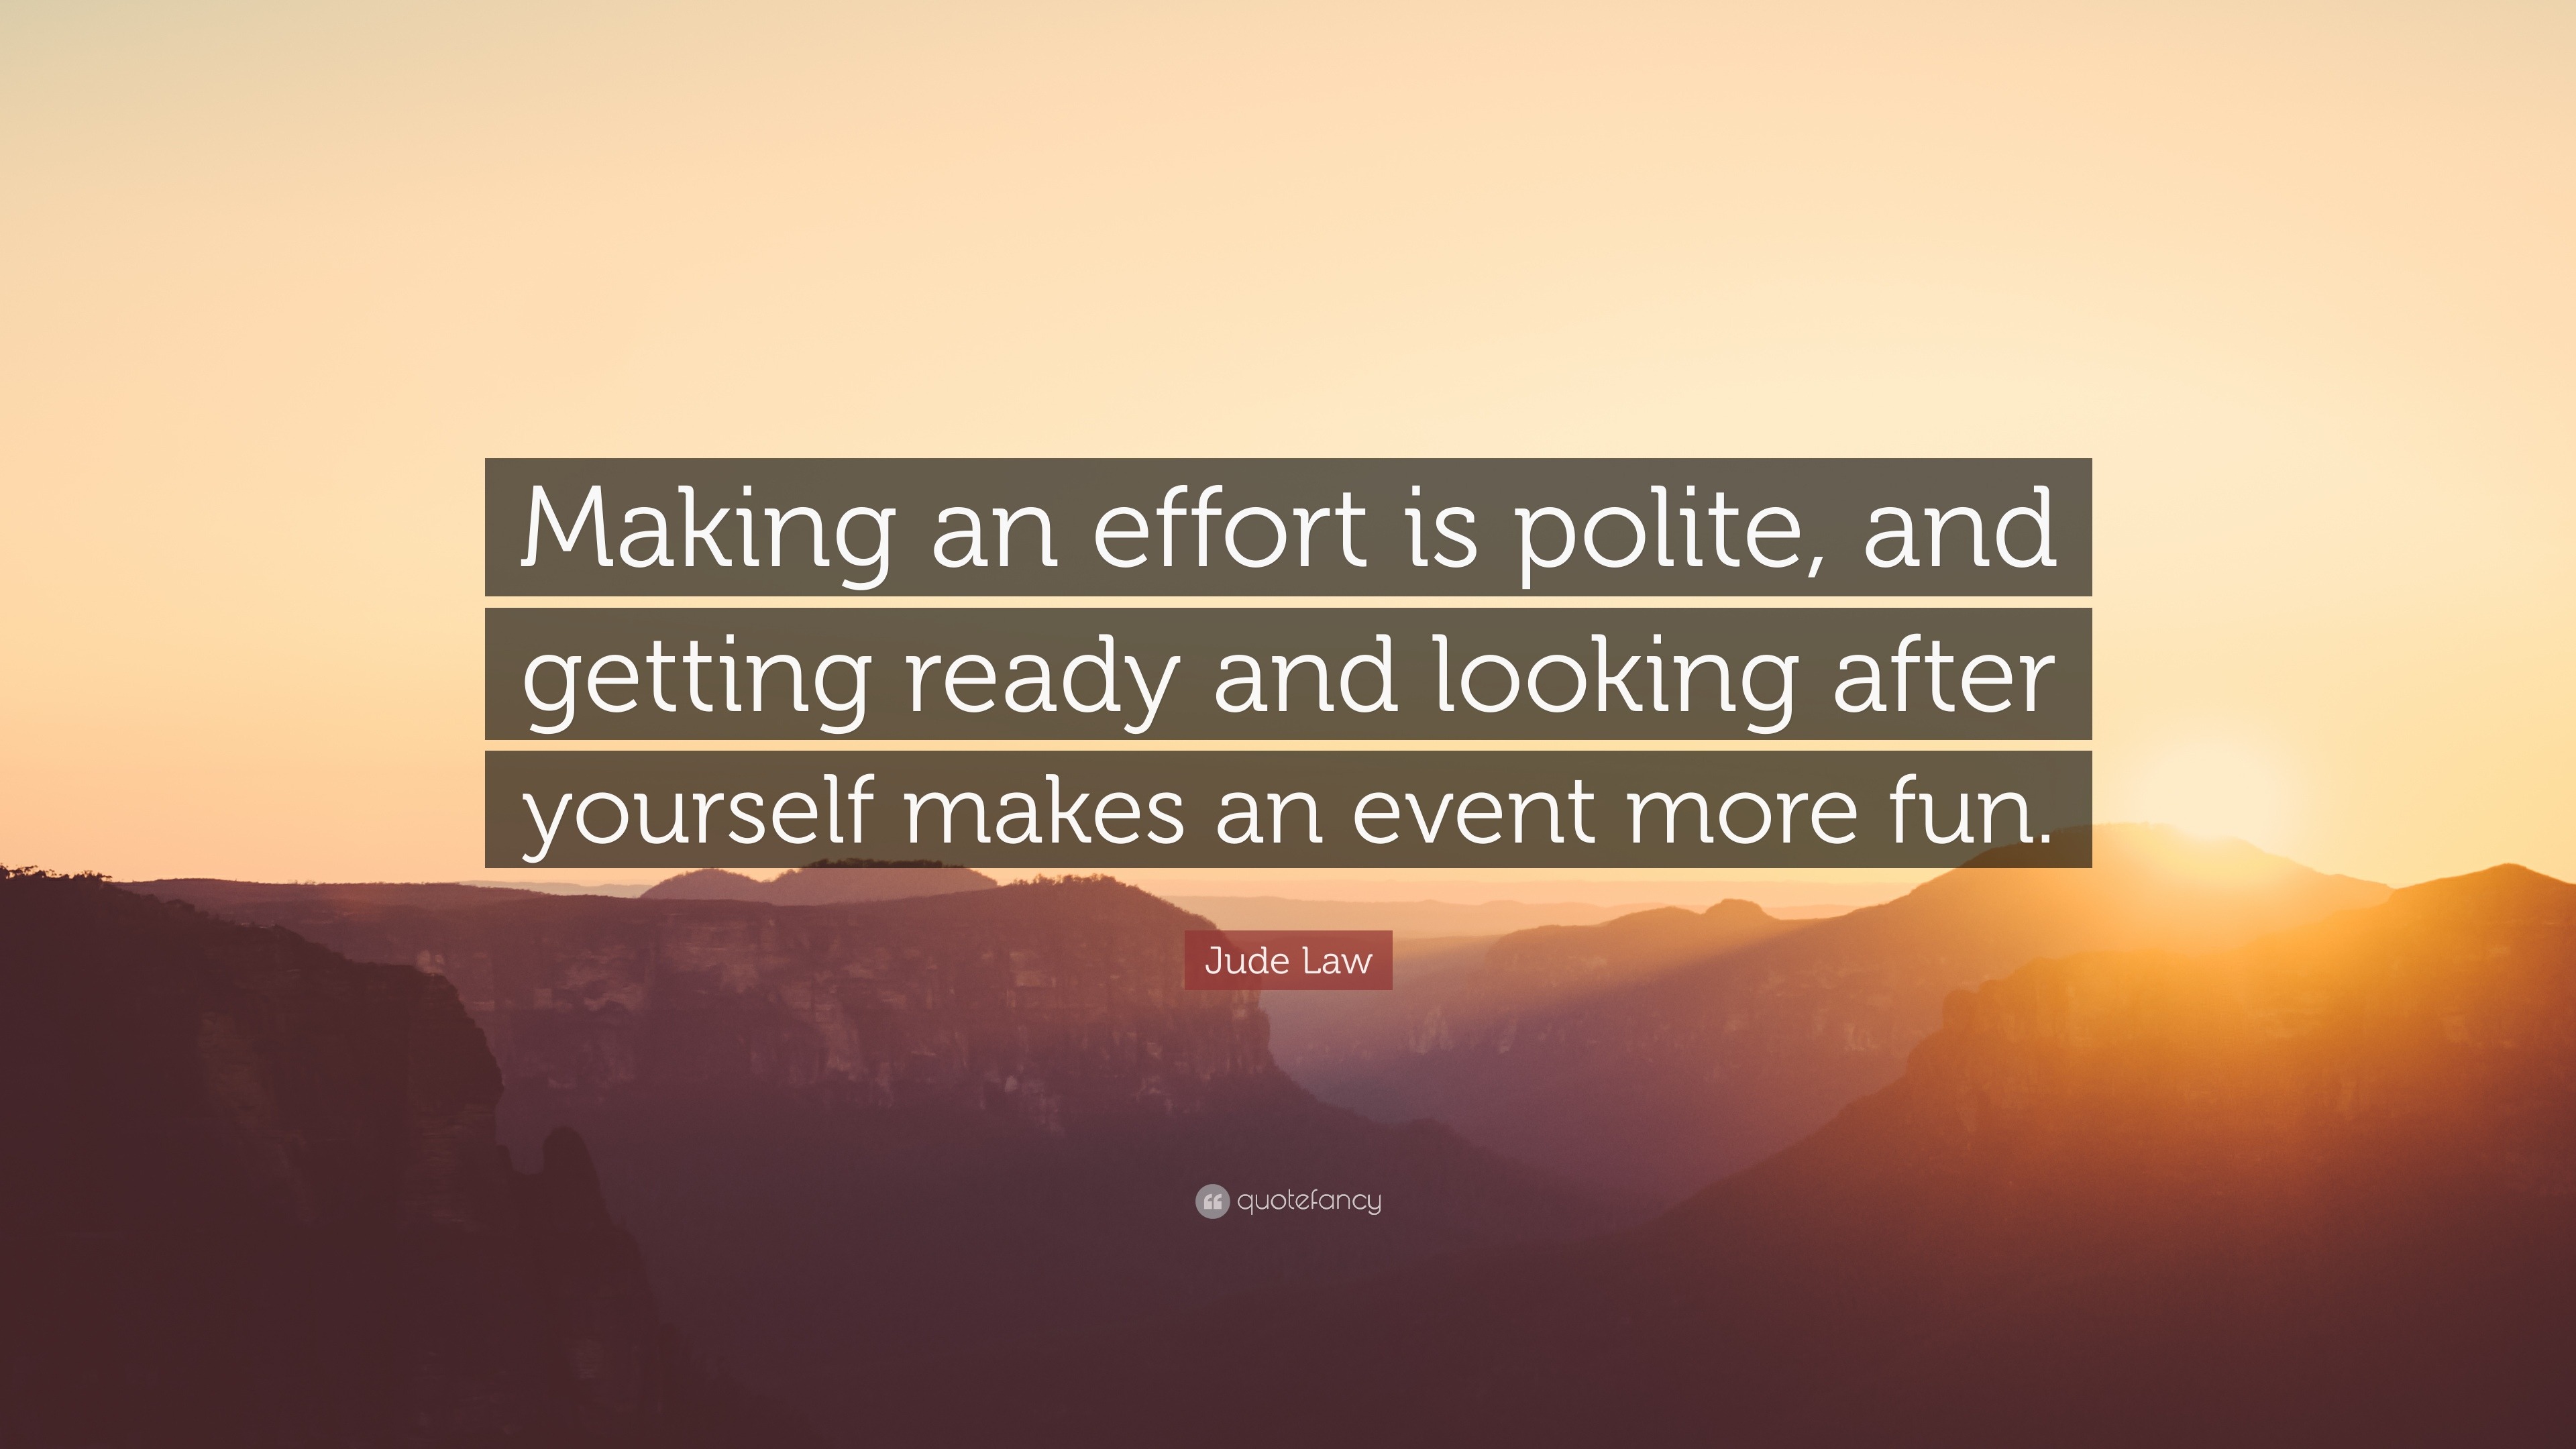 Jude Law Quote Making An Effort Is Polite And Getting Ready And Looking After Yourself Makes An Event More Fun 7 Wallpapers Quotefancy